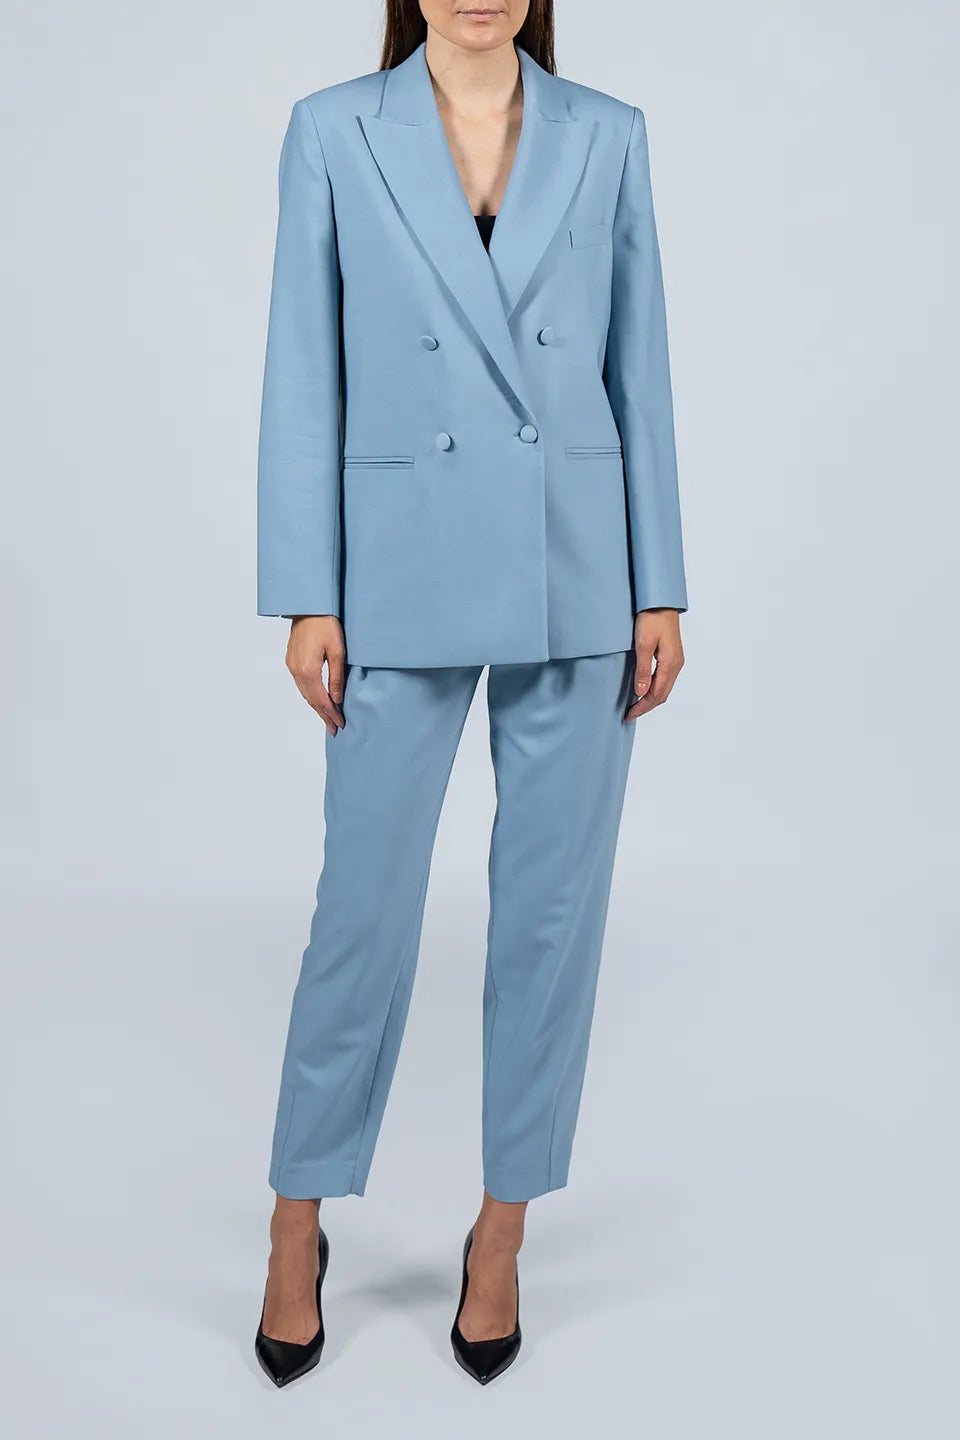 Designer Blue Women blazers, Jacket, shop online with free delivery in UAE. Product gallery 2